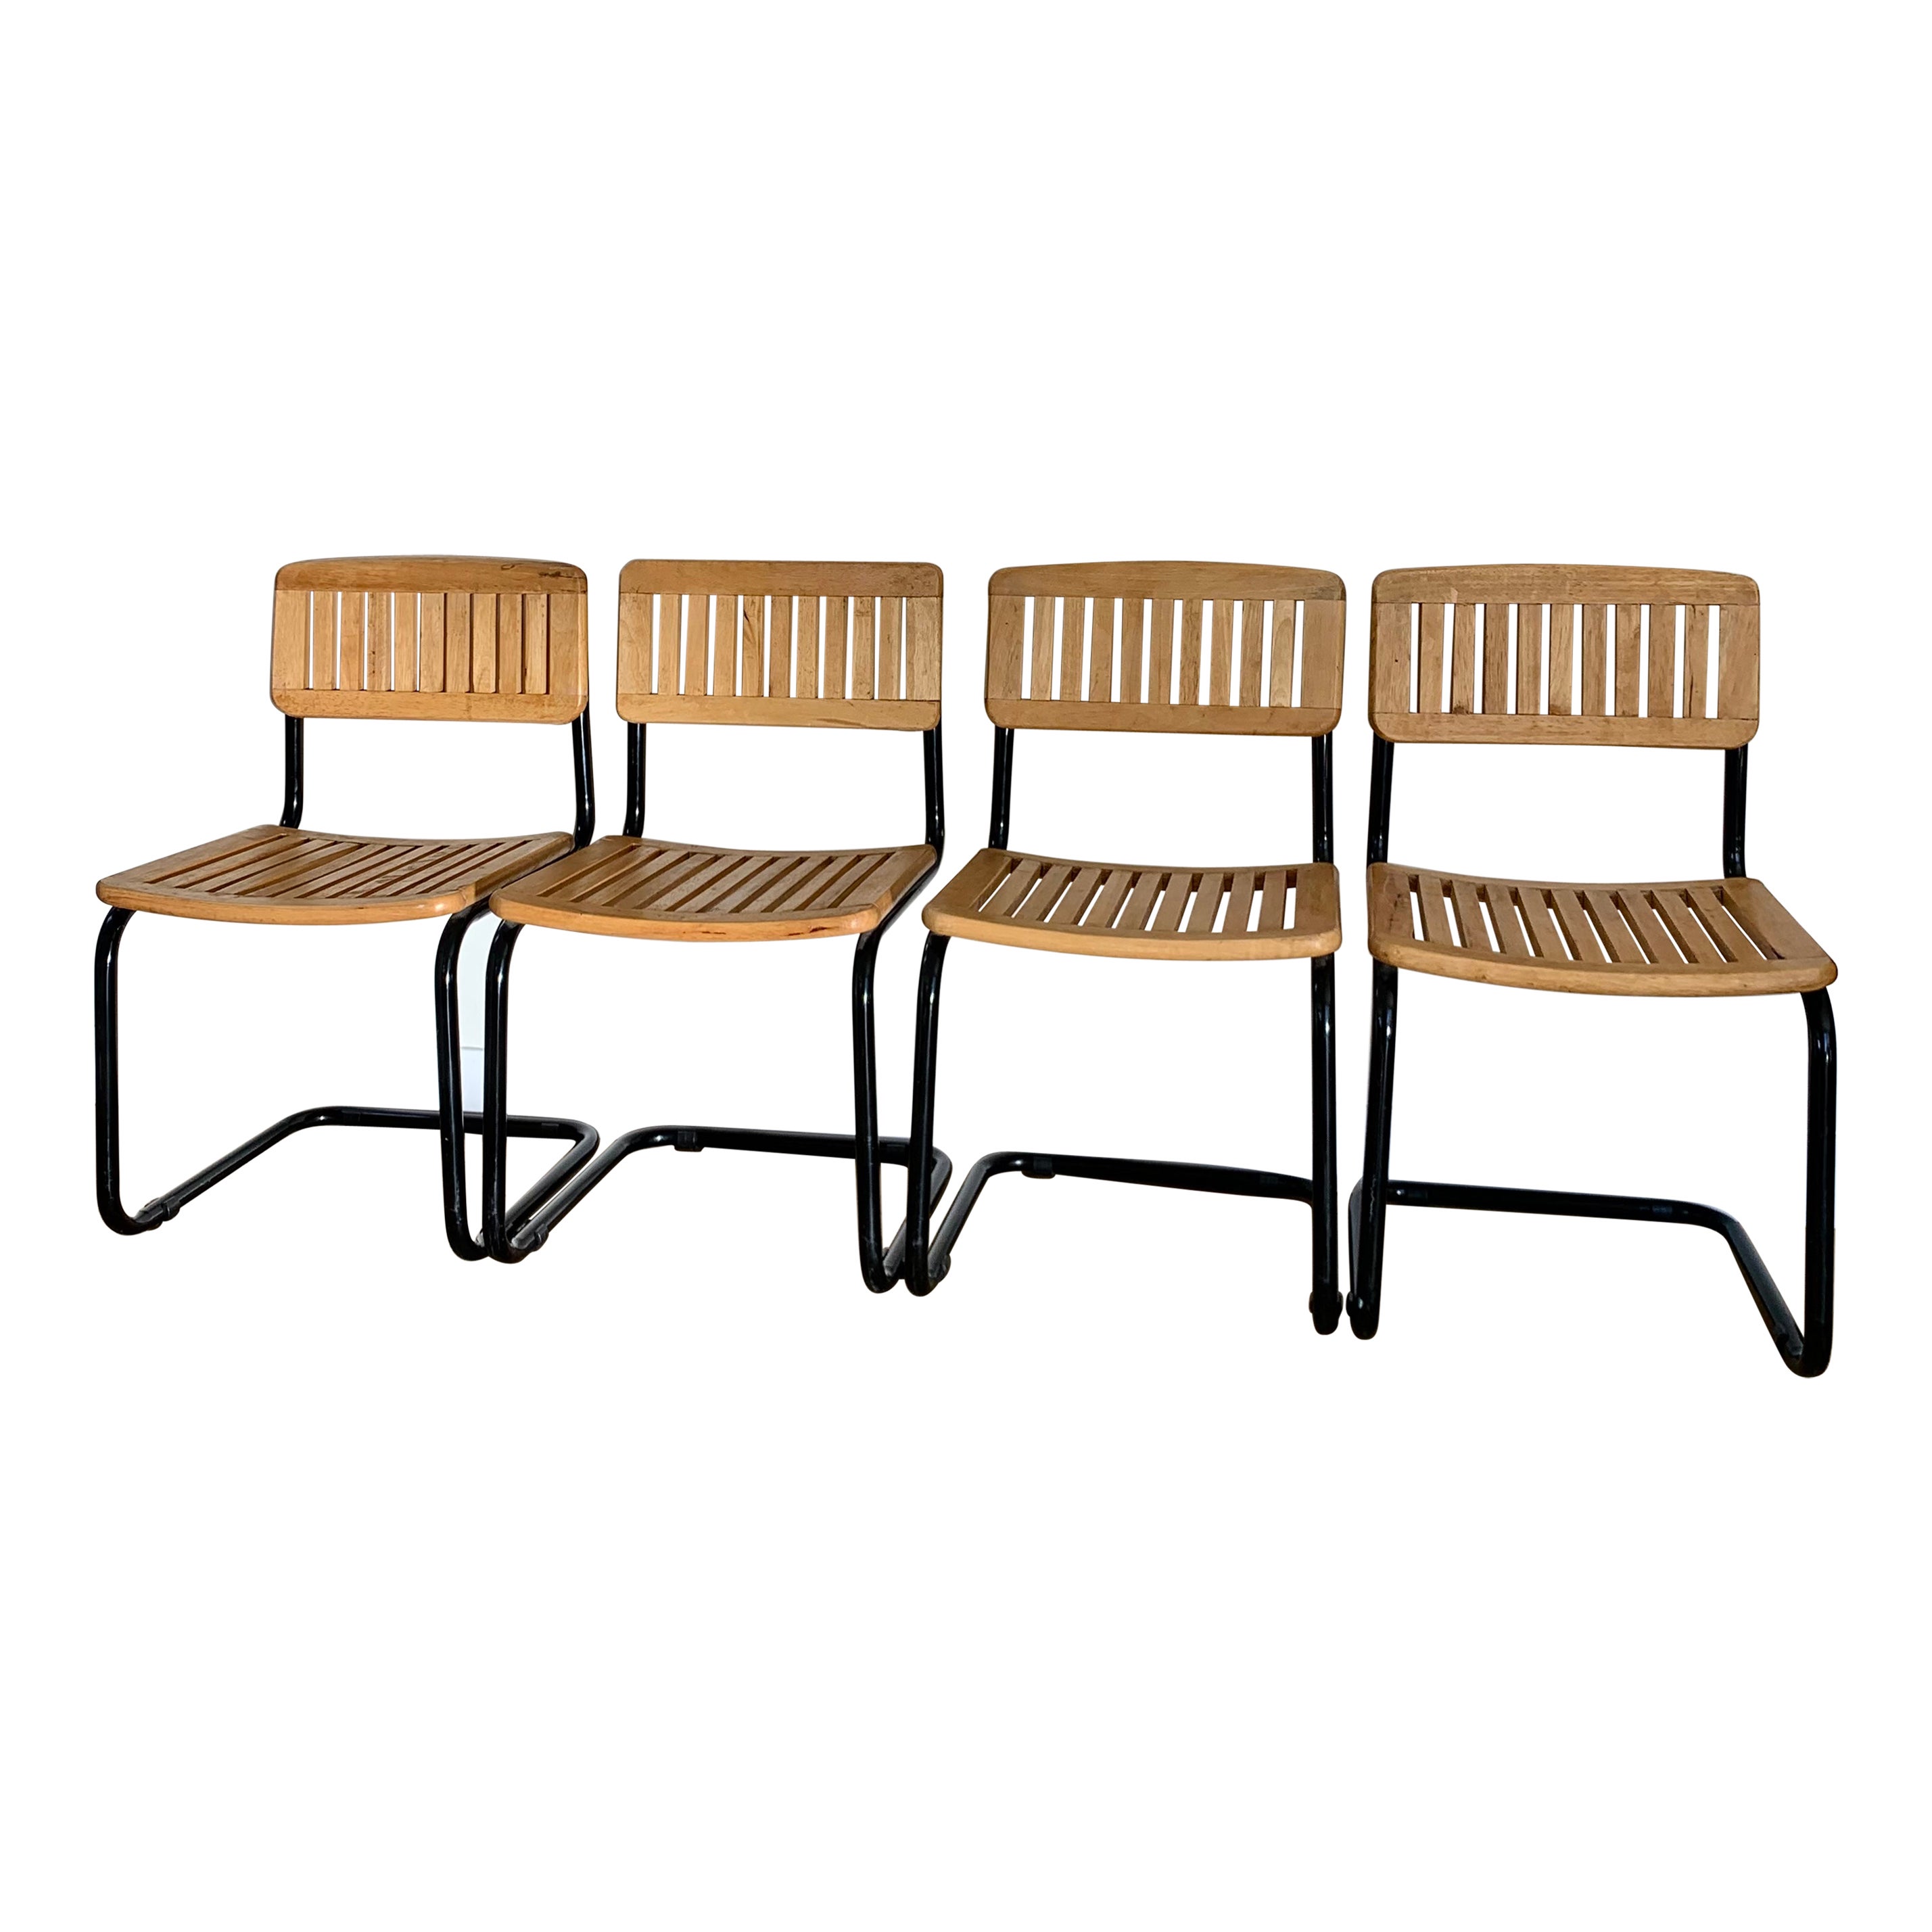 Four Mid Century Wood and Lacquer Cesca-Style Chairs, 1970s